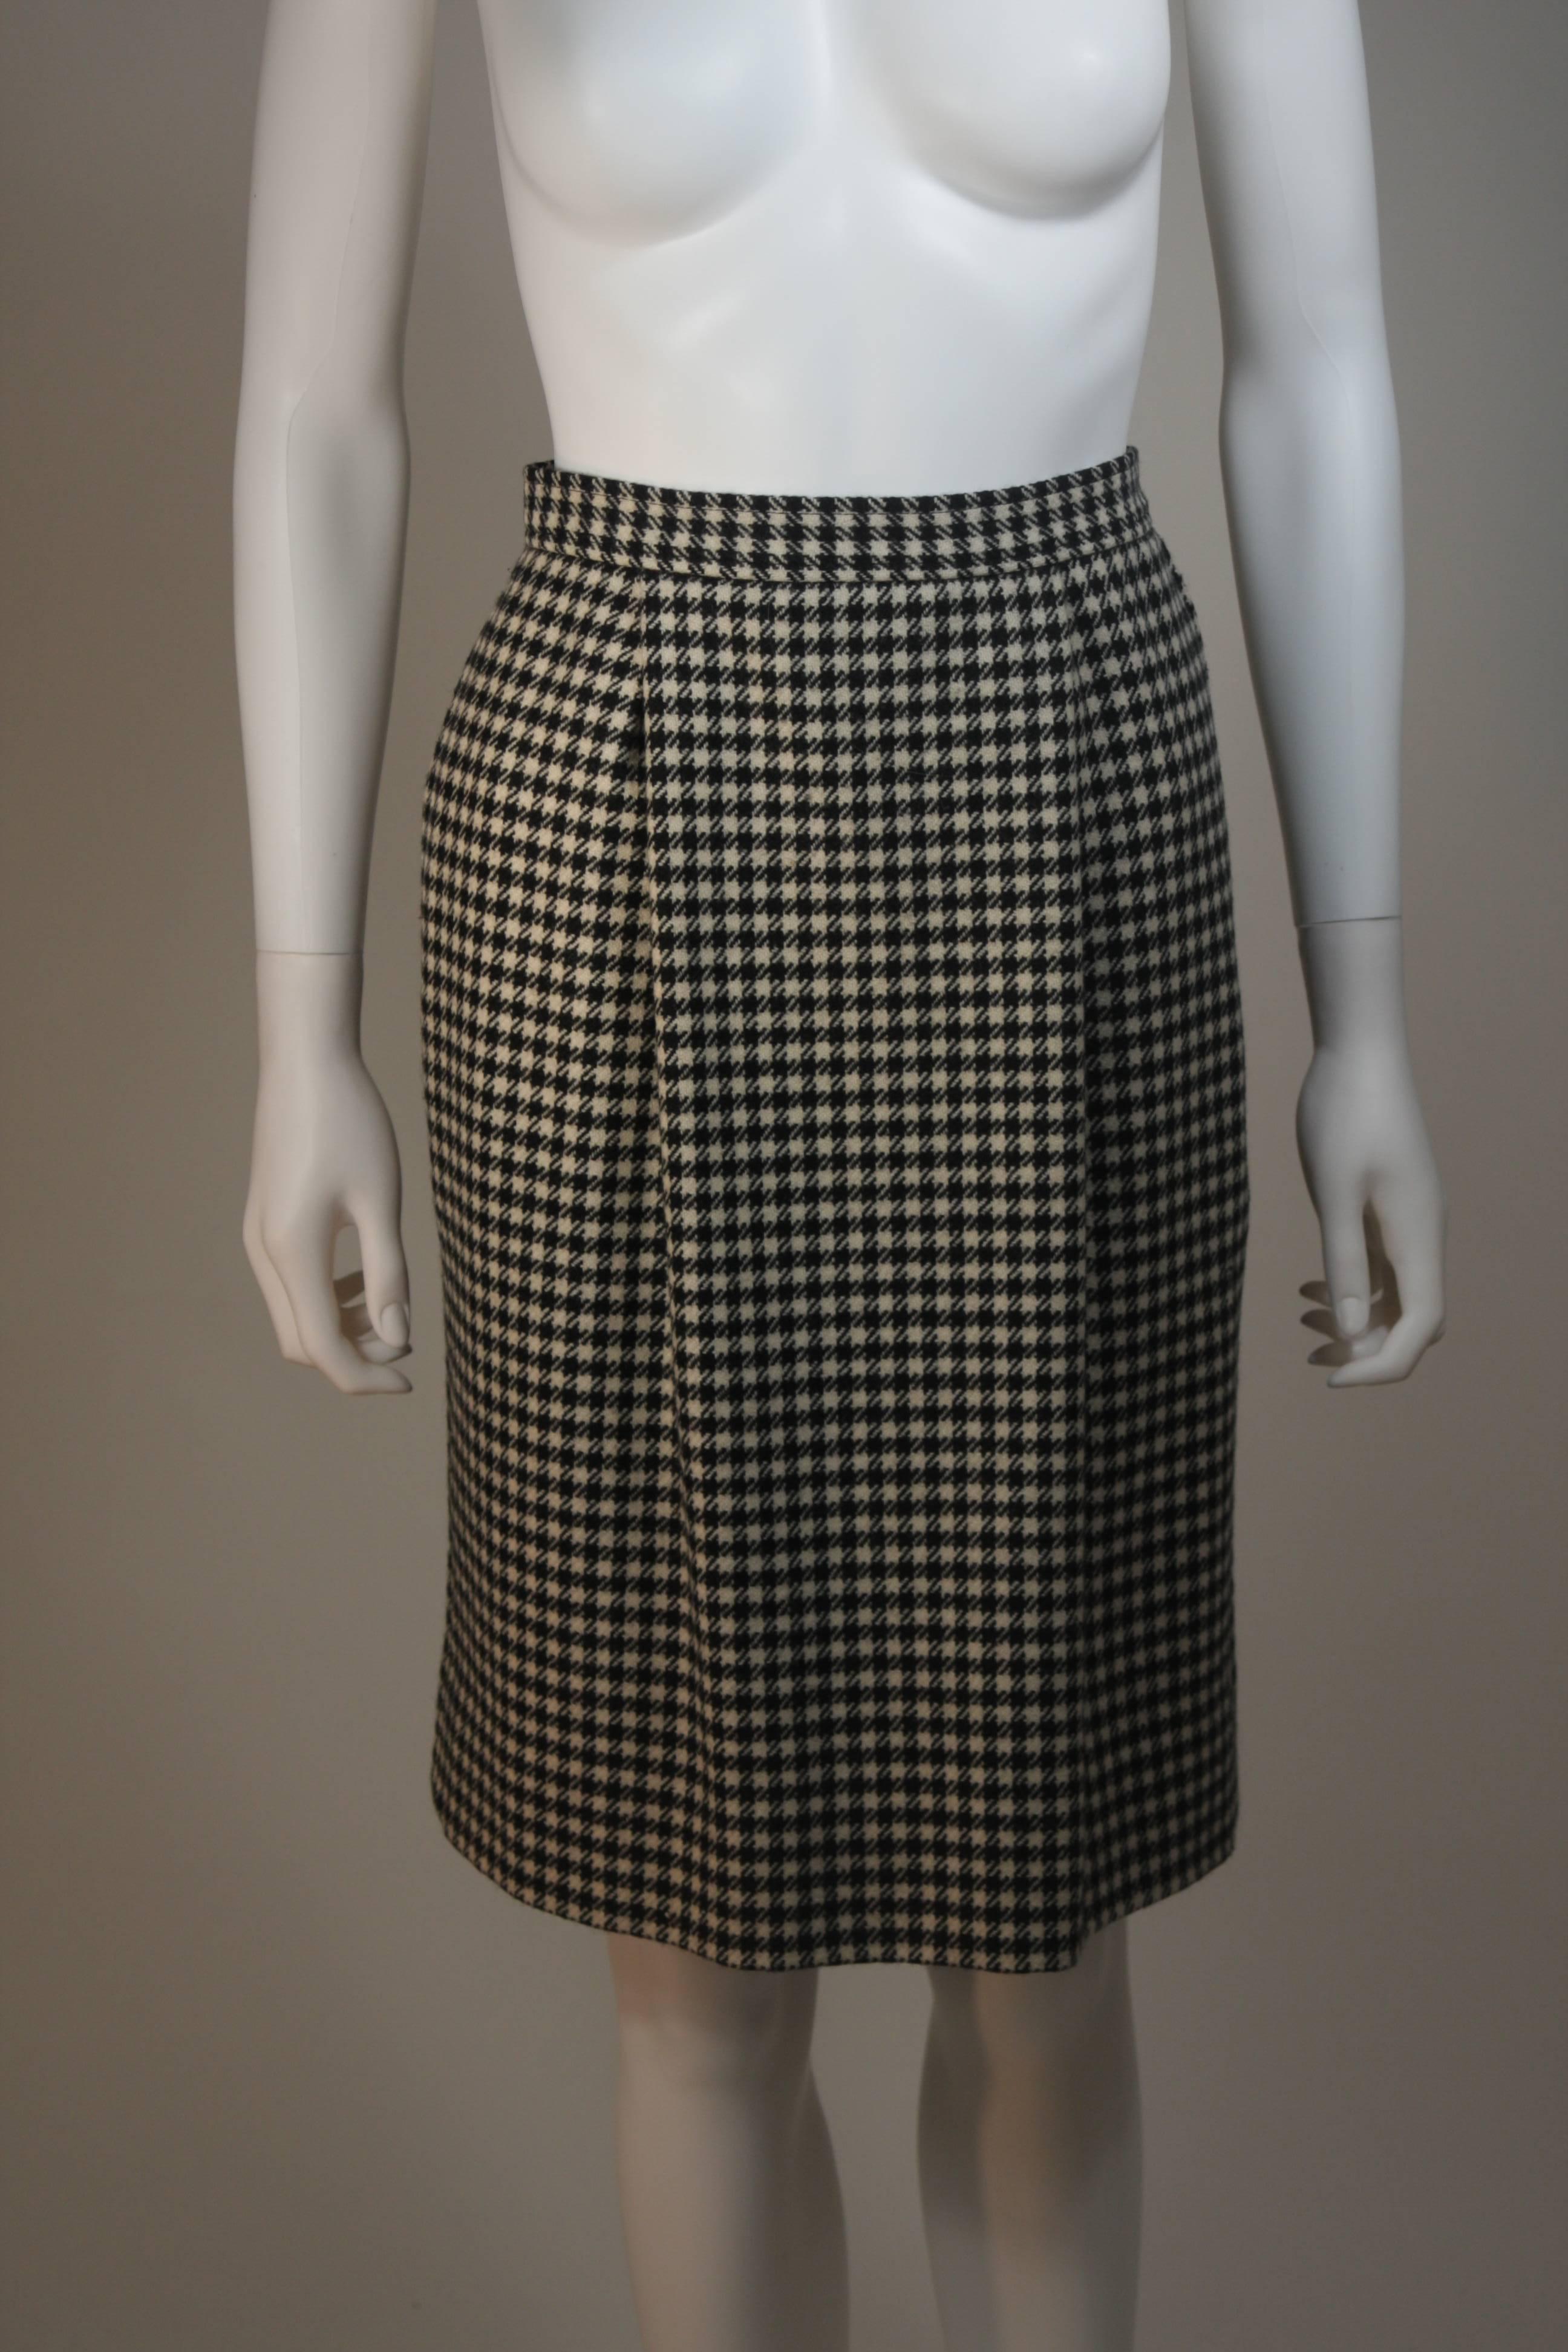 YVES SAINT LAURENT Black and White Wool Houndstooth Skirt Suit Size 36 40 For Sale 4